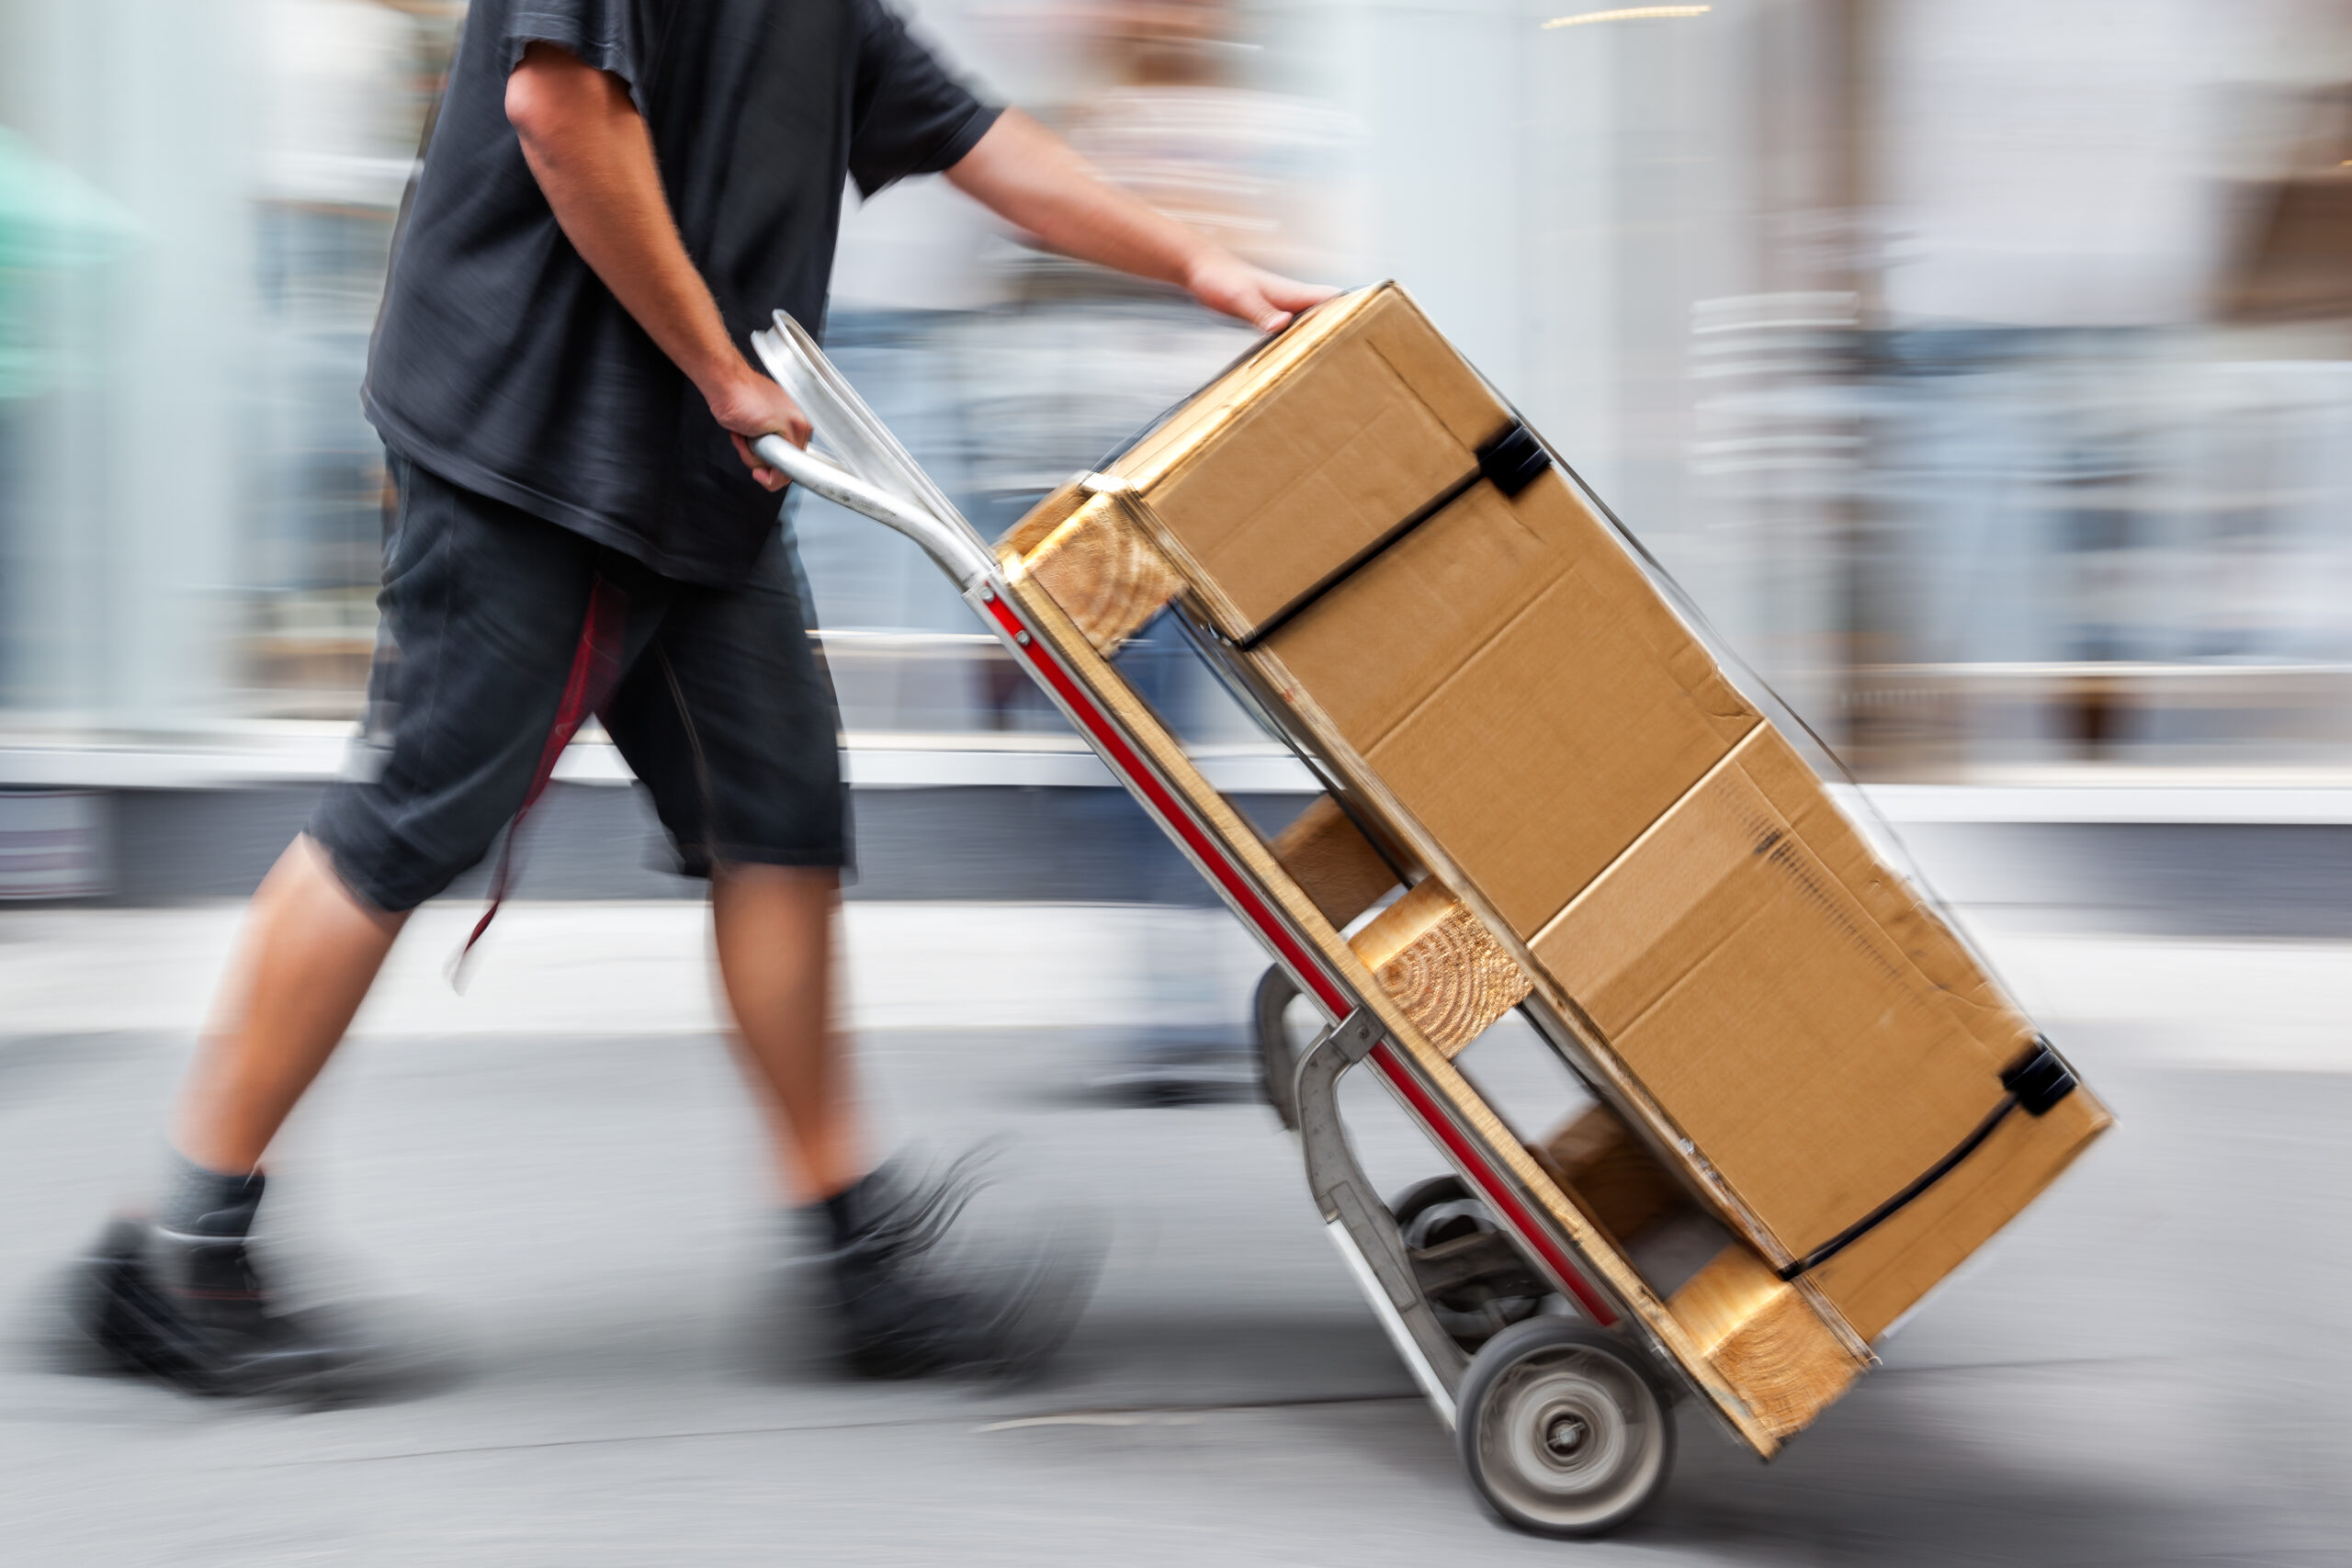 Parcel Delivery Driver Carriers Heavy Packages on Dolly